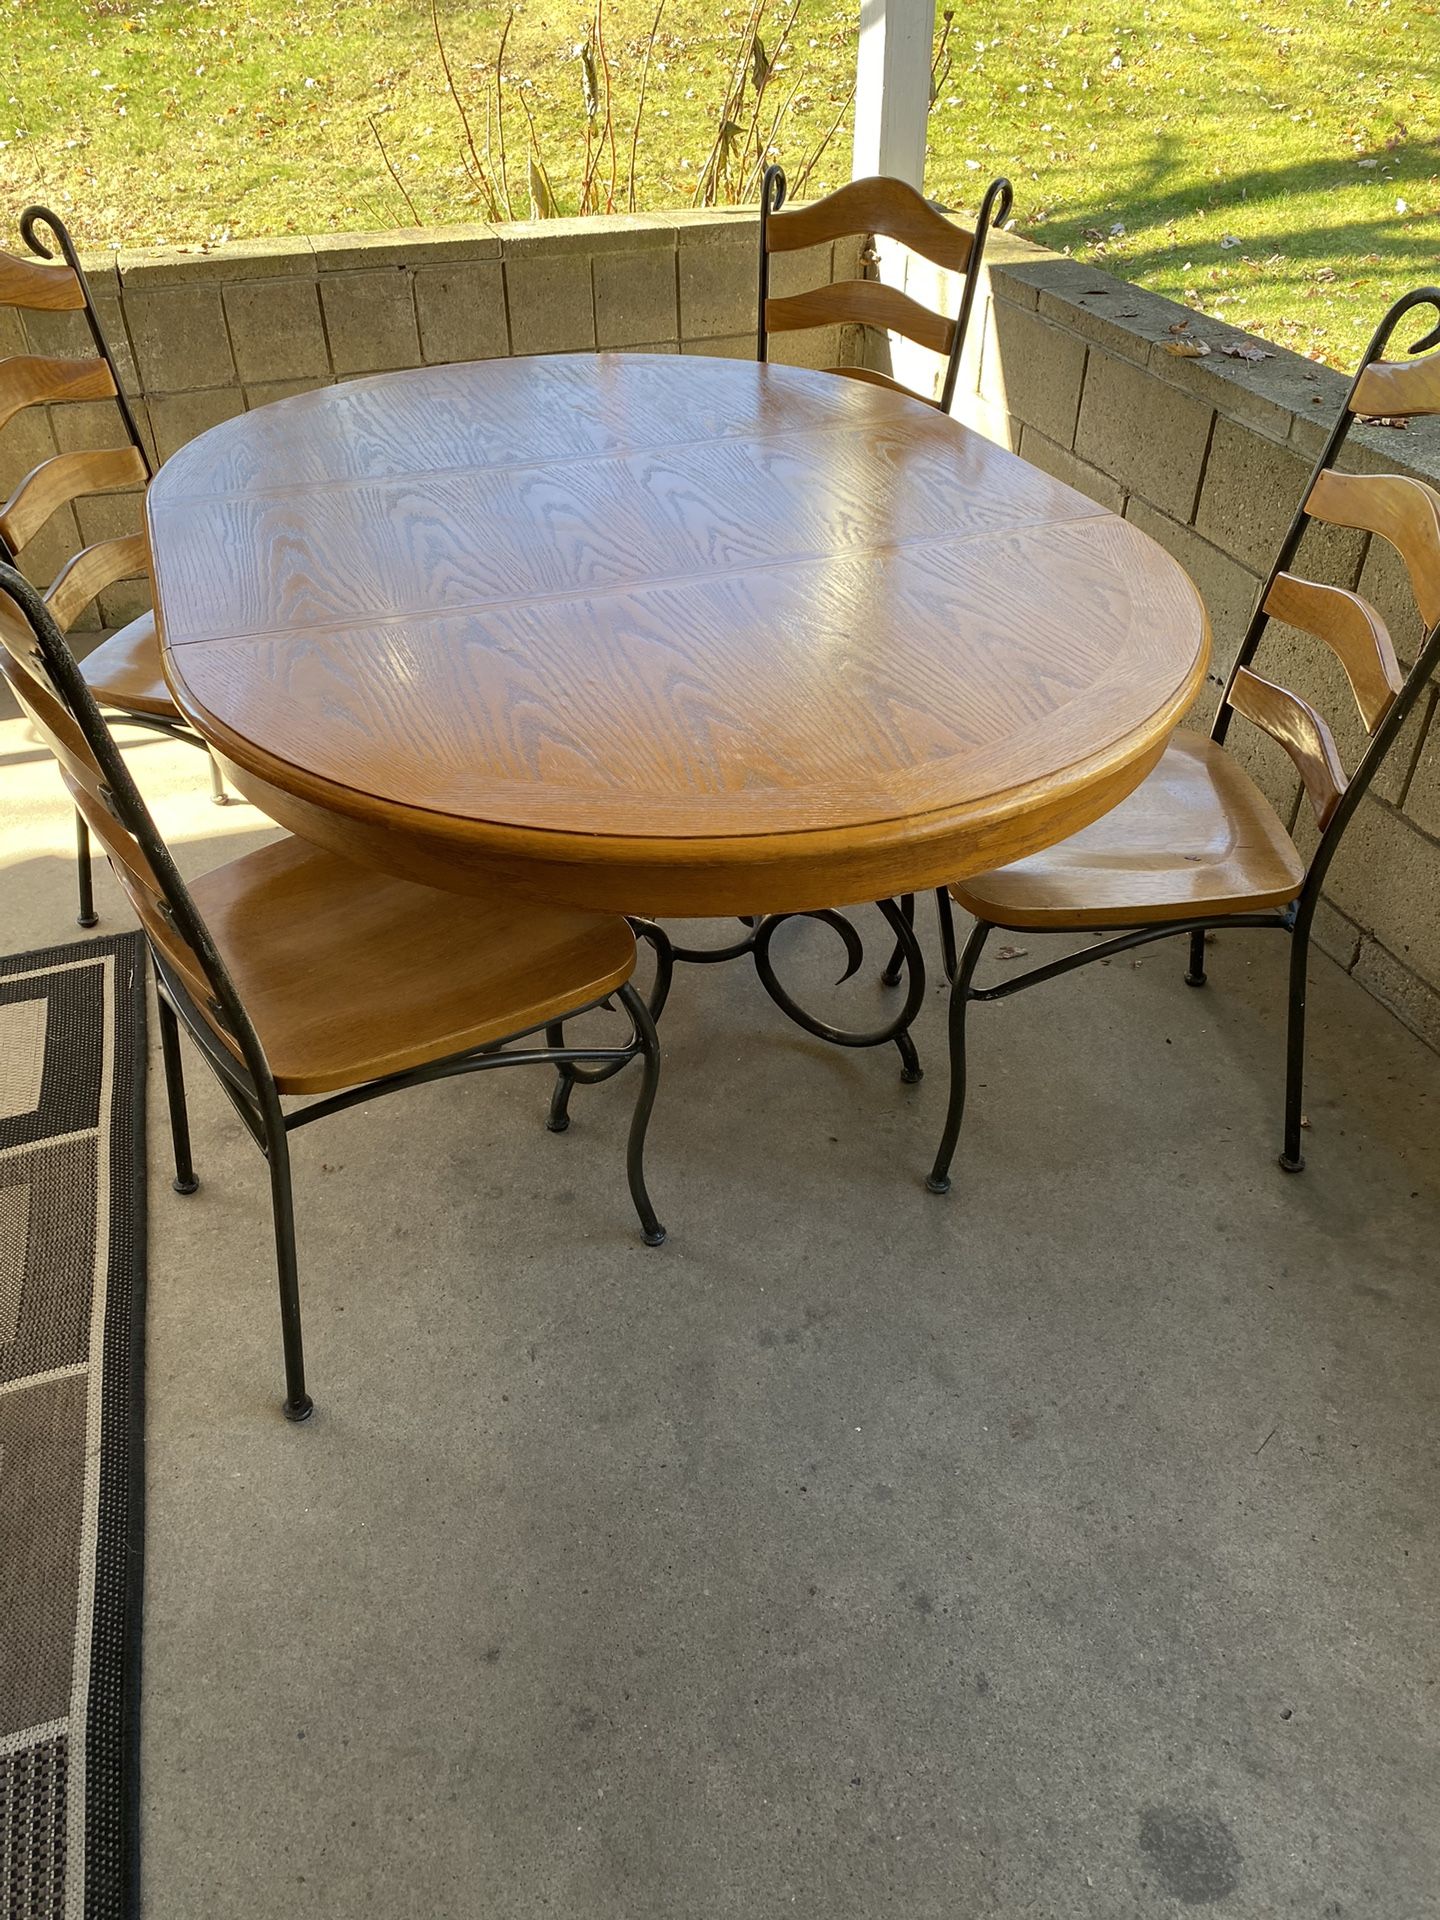 Beautiful Wooden And Wrought Iron Pedestal Table With Leaf & 4 Chairs